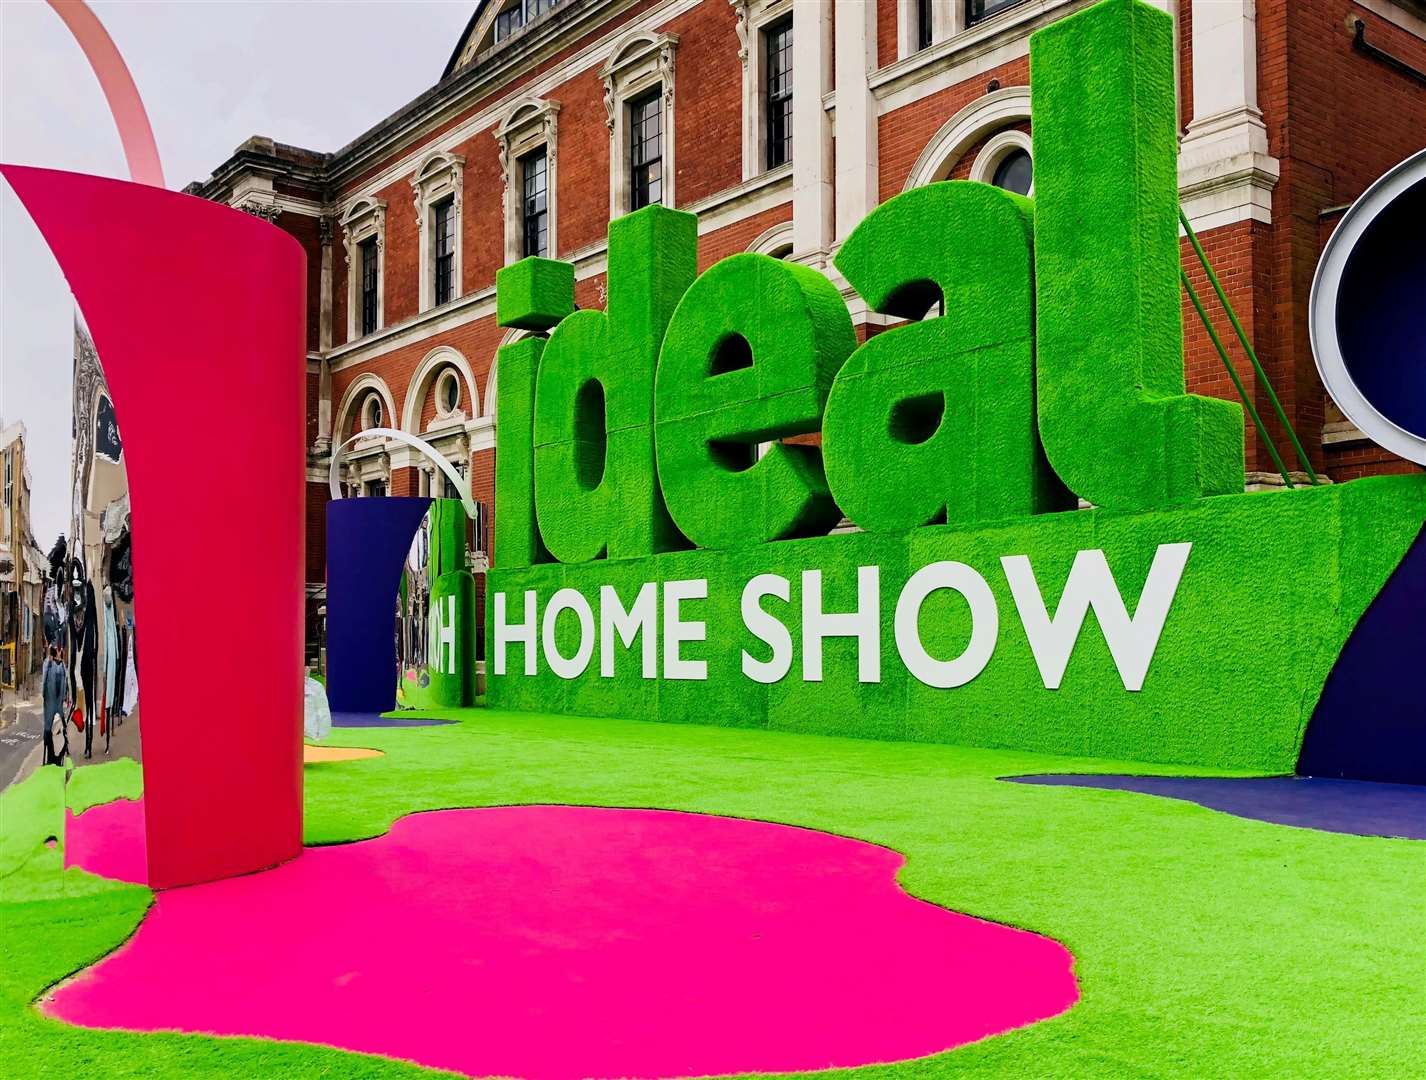 The Ideal Home Show will be in Olympia in London